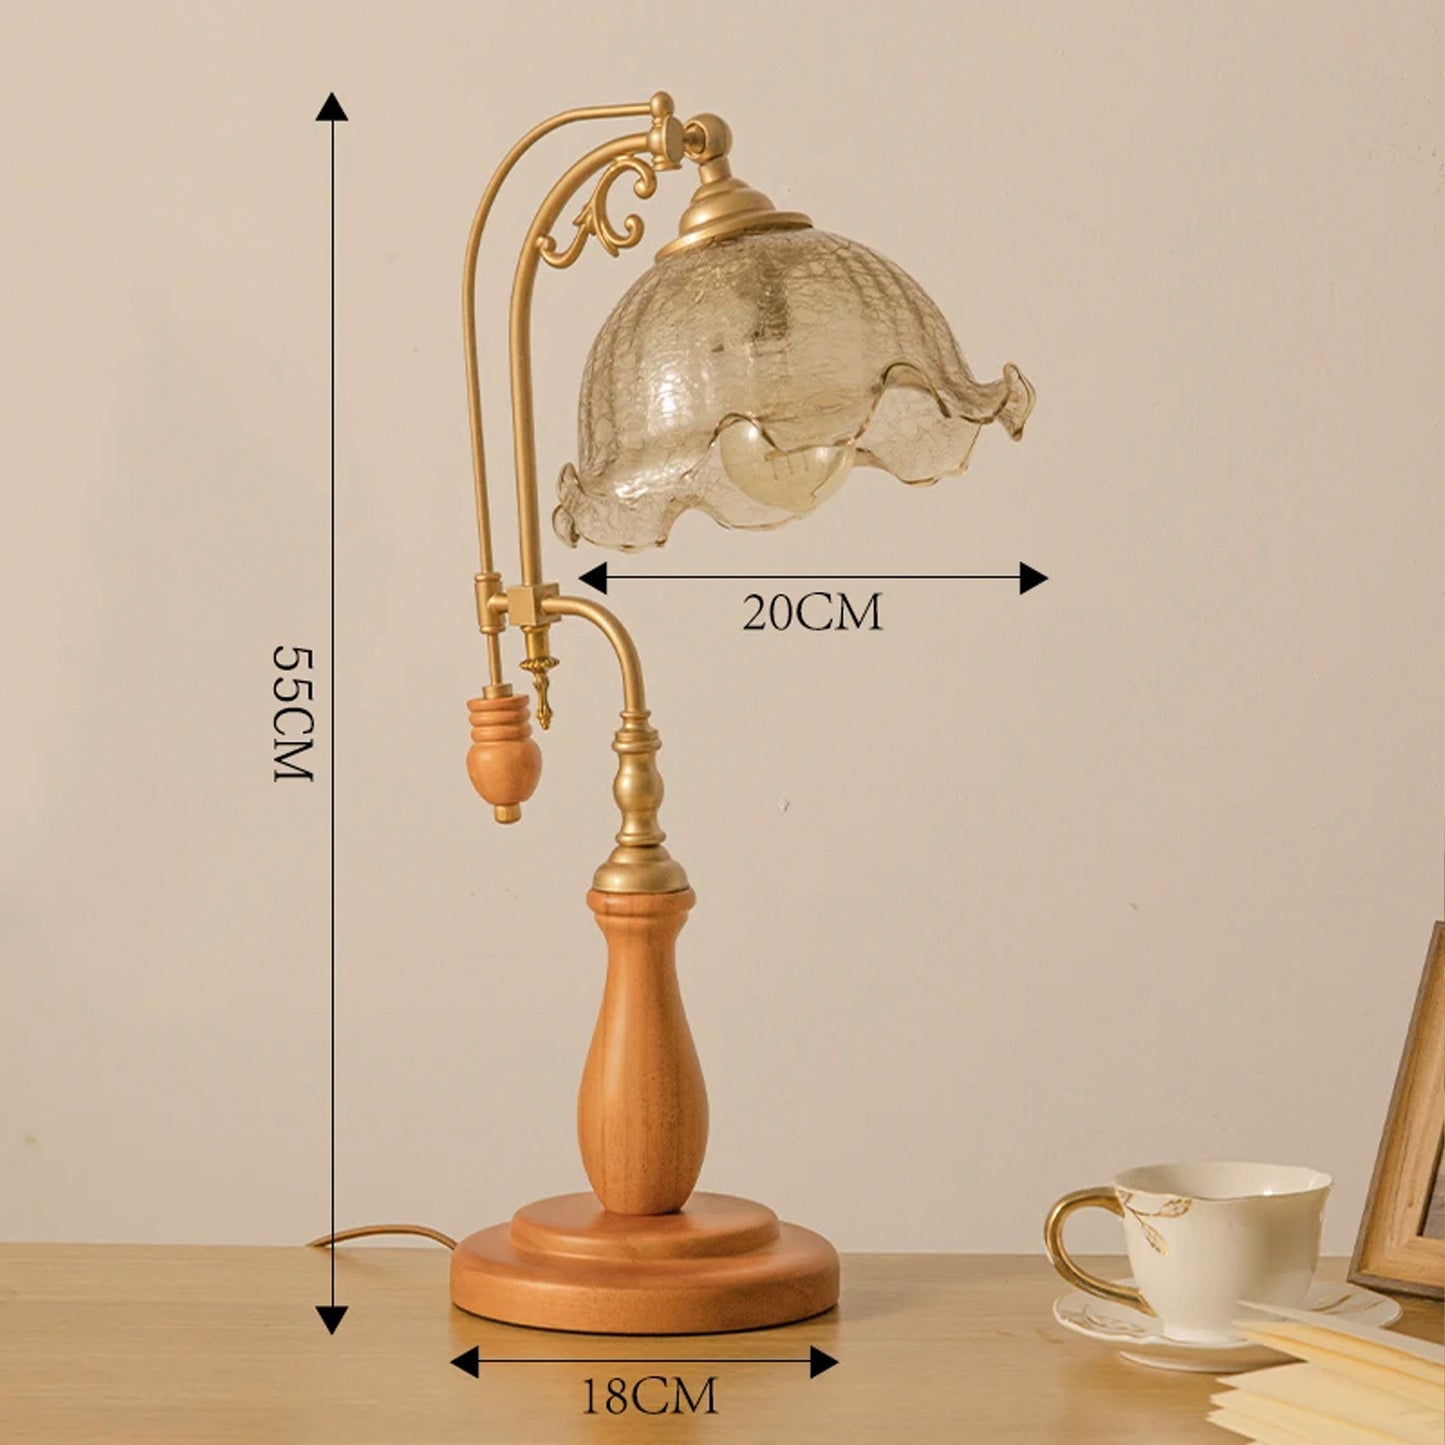 French Vintage Glass Table Lamp